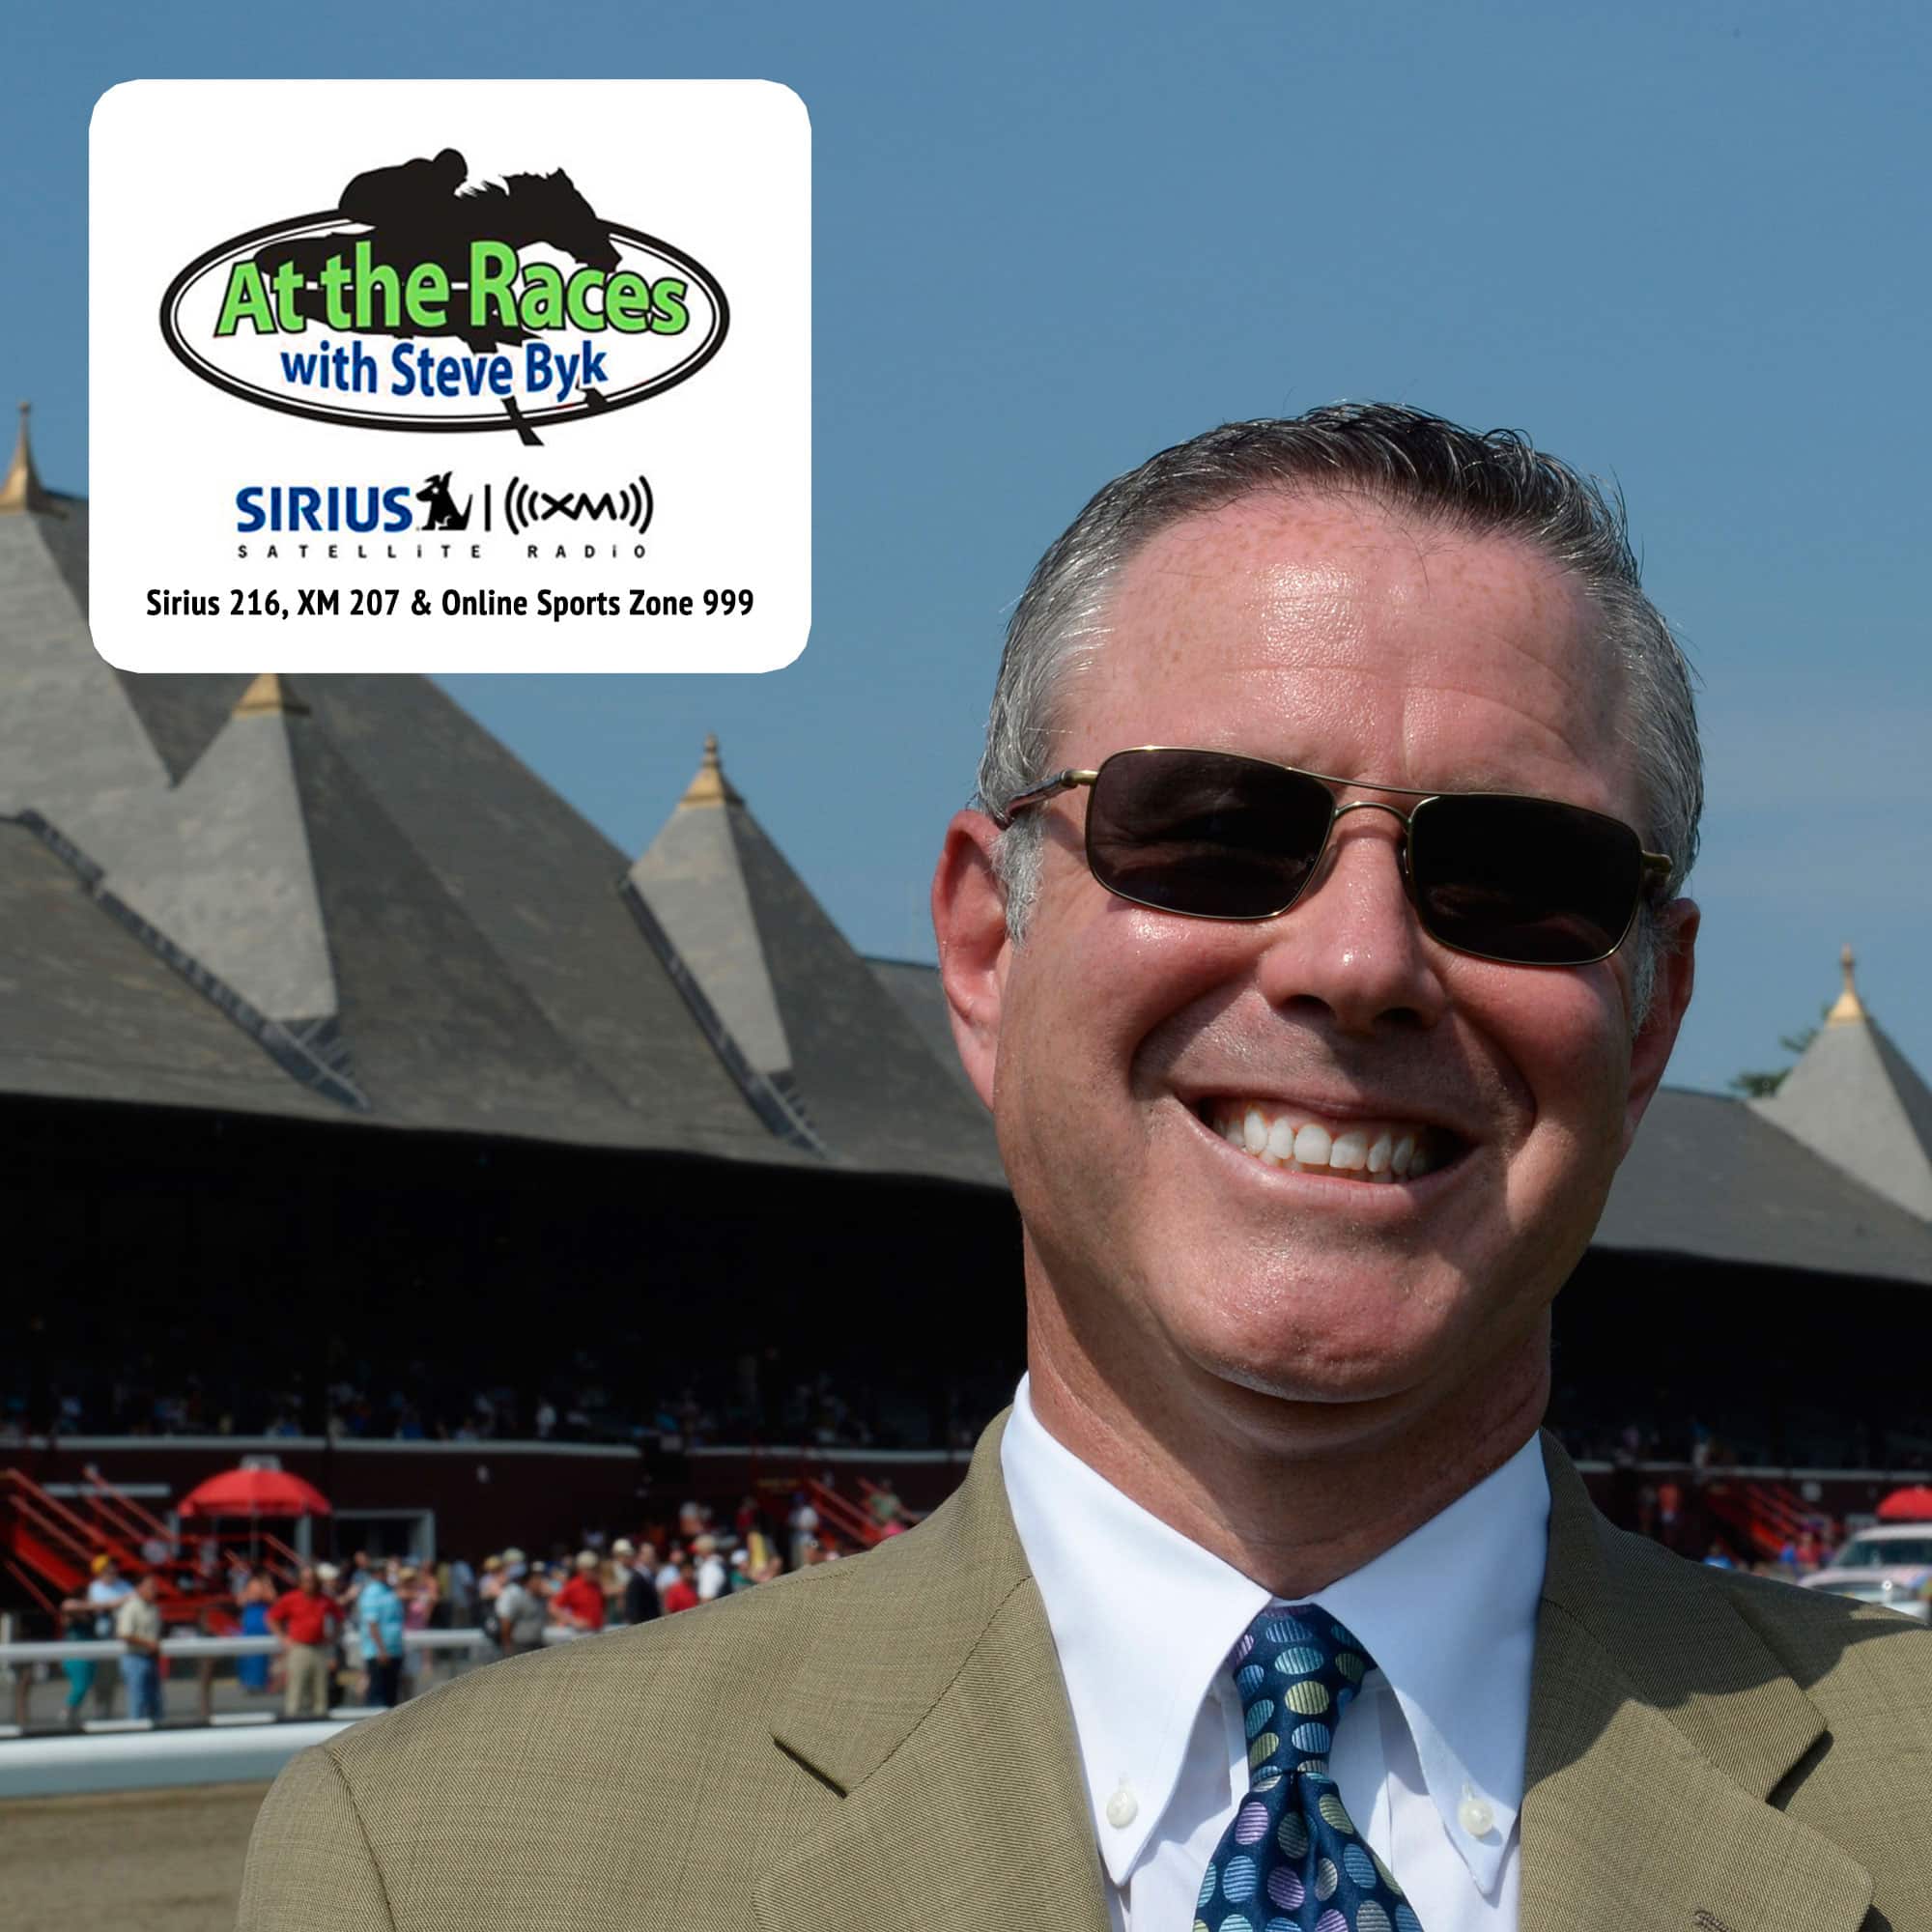 Thursday Monmouth Park ’24 ATR from Iroquois Steeplechase-Part 1: Tony Black, Chasey Pomier, James Scully, Drew Dinsick, Nick Luck